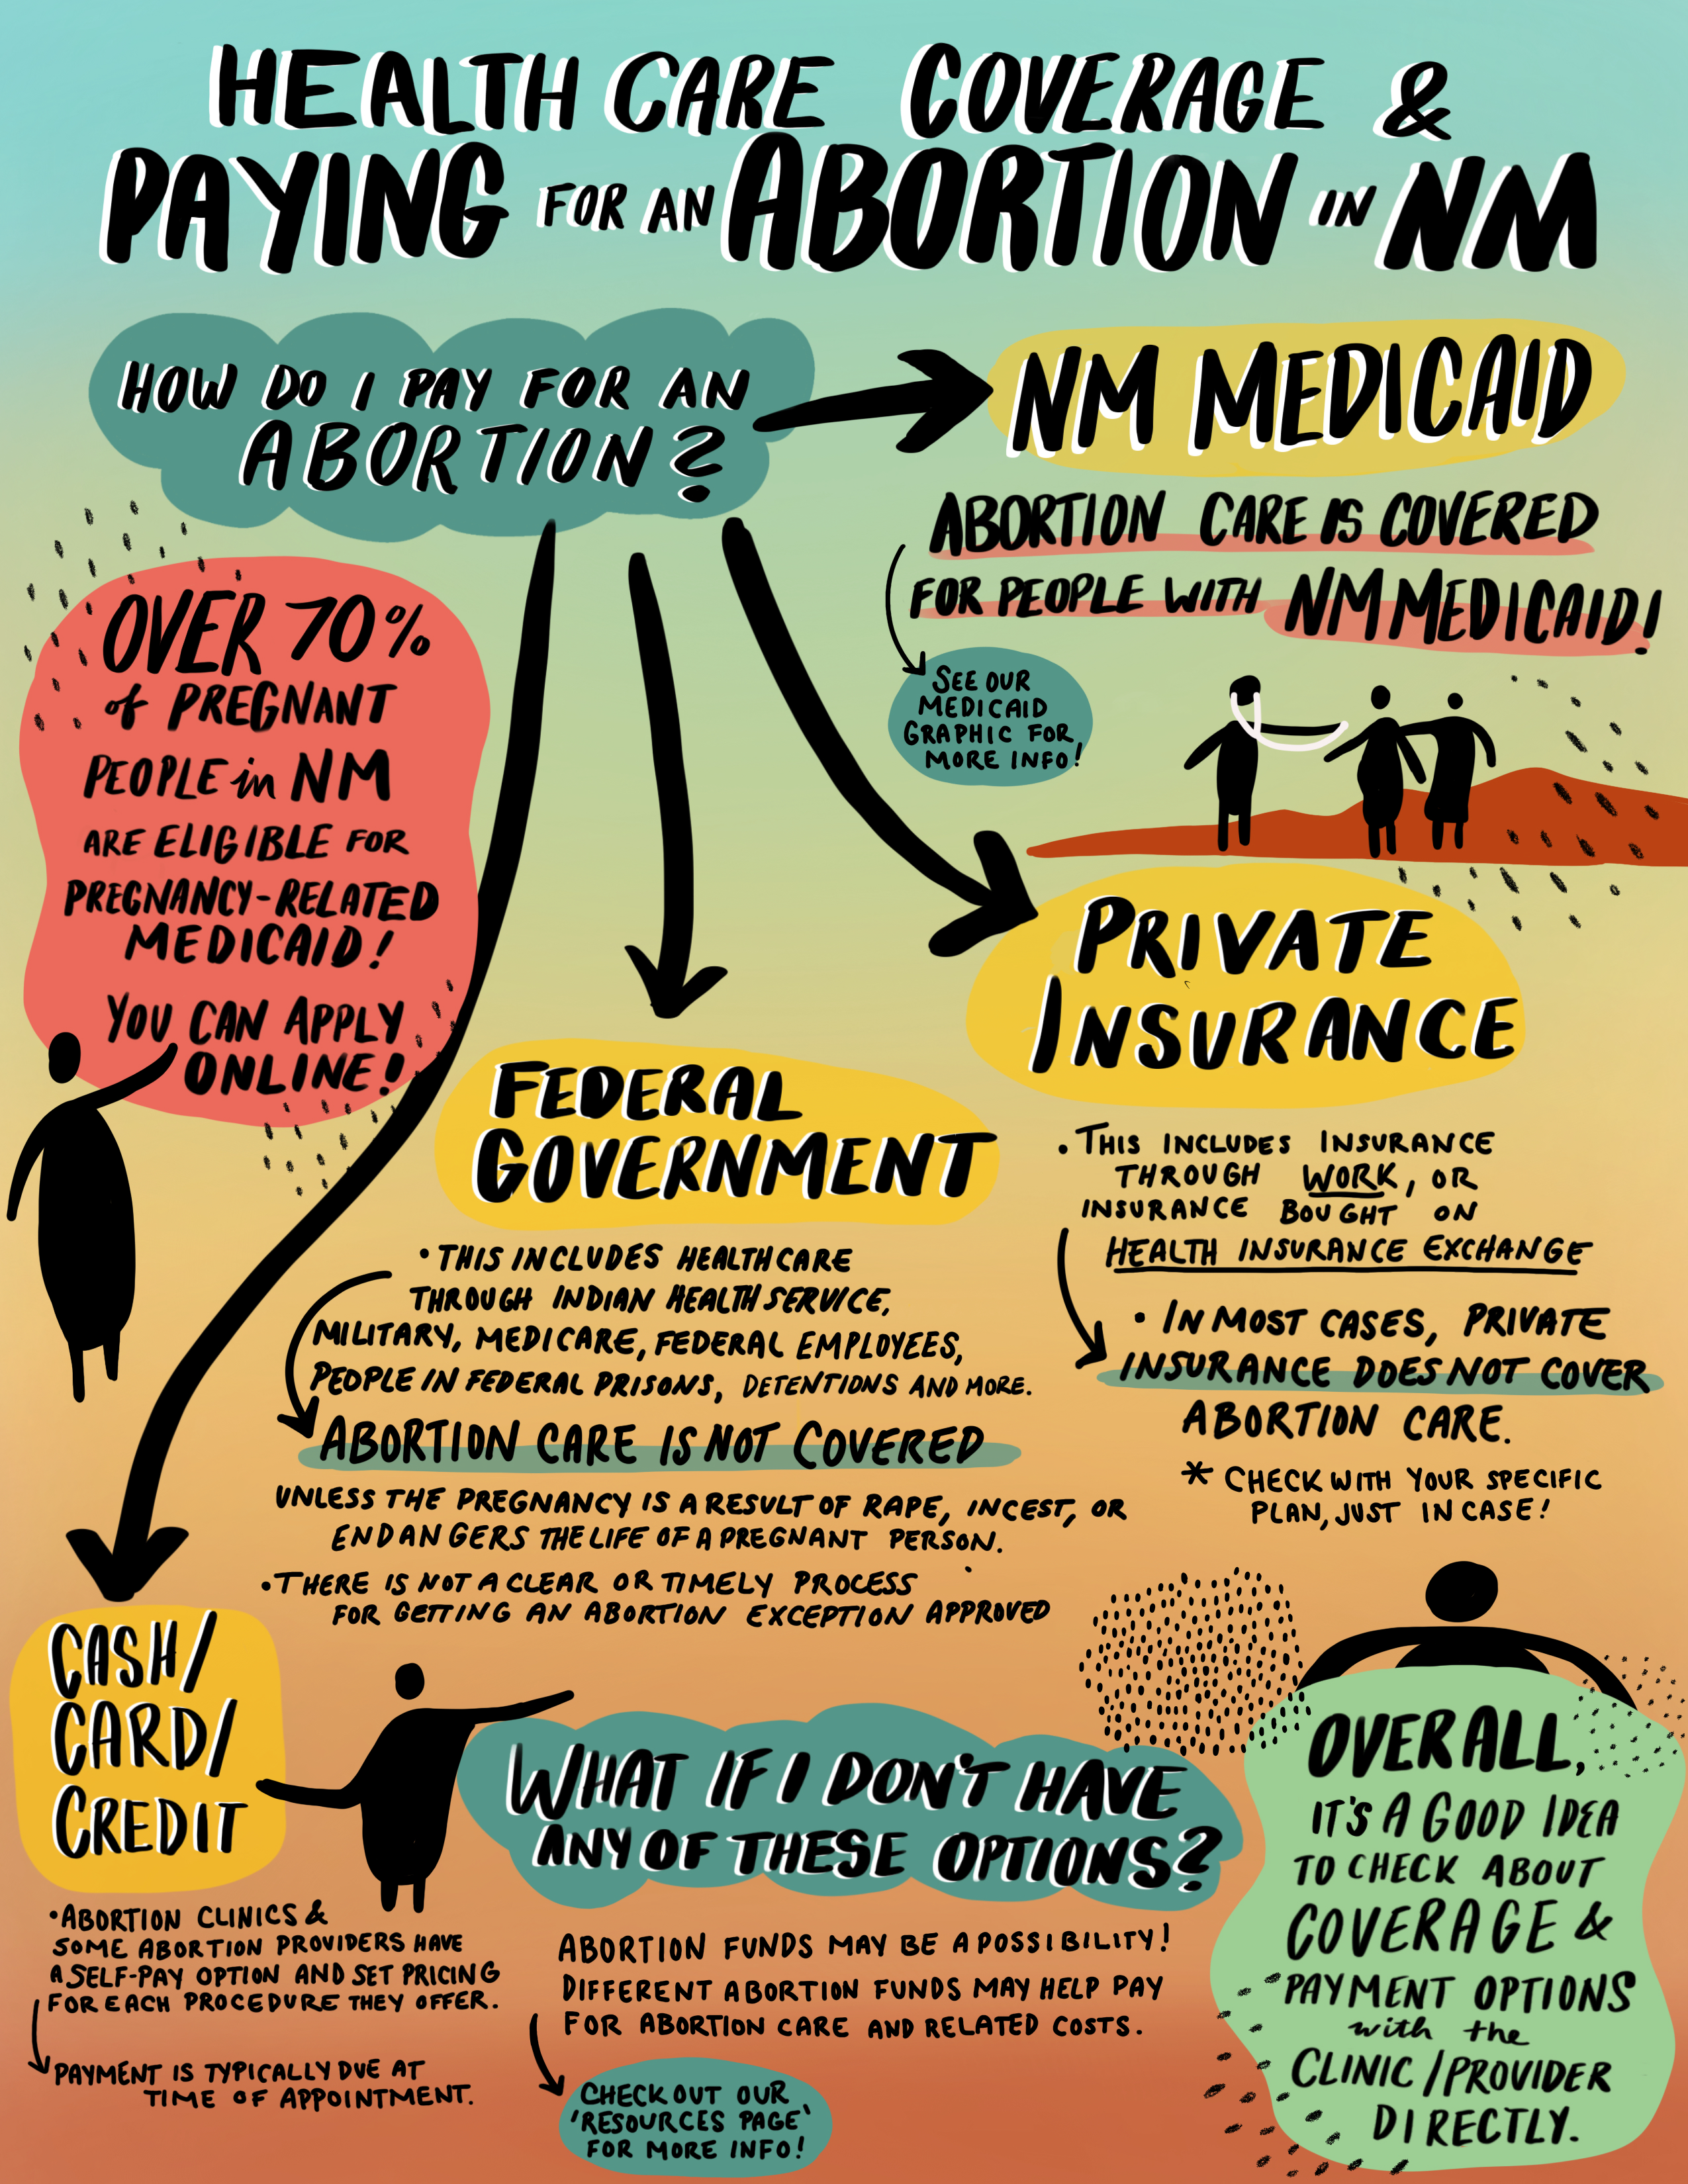 Illustrated infographic in map form titled “Healthcare Coverage and Paying for an abortion in NM”. The question at the beginning of the map reads, “How do I pay for an abortion?” with 4 sections of answers that say, “1. NM Medicaid. Abortion care is covered for people with NM Medicaid. See Medicaid infographic for more info.Over 70% of pregnant people in NM are eligible for pregnancy-related Medicaid, and you can apply online! 2.Private Insurance. Insurance through work, or insurance bought on health insurance exchange. In most cases, private insurance does not cover abortion care. Check with your specific plan just in case. 3. Federal Government (Indian Health Service, Military, Medicare, Federal employees, people in federal prisons and detentions, and more). Abortion care is not covered unless the pregnancy is a result of rape, incest, or endangers the life of a pregnant person (see Hyde Amendment in definition section). There is not a clear or timely process for getting an abortion exception approved(see Hyde Amendment in definition sections) 4. Cash, Card, or Credit. Abortion clinics and some abortion providers have a self-pay option and set pricing for each procedure they offer. Payment is typically due at the time of appointment.” The next section reads, “What if I don’t have any of these options? Abortion funds may be a possibility! Different abortion funds may help pay for abortion care and related costs. Check out our resources page for more information. Overall, it’s a good idea to check about coverage and payment with clinic/provider directly.”